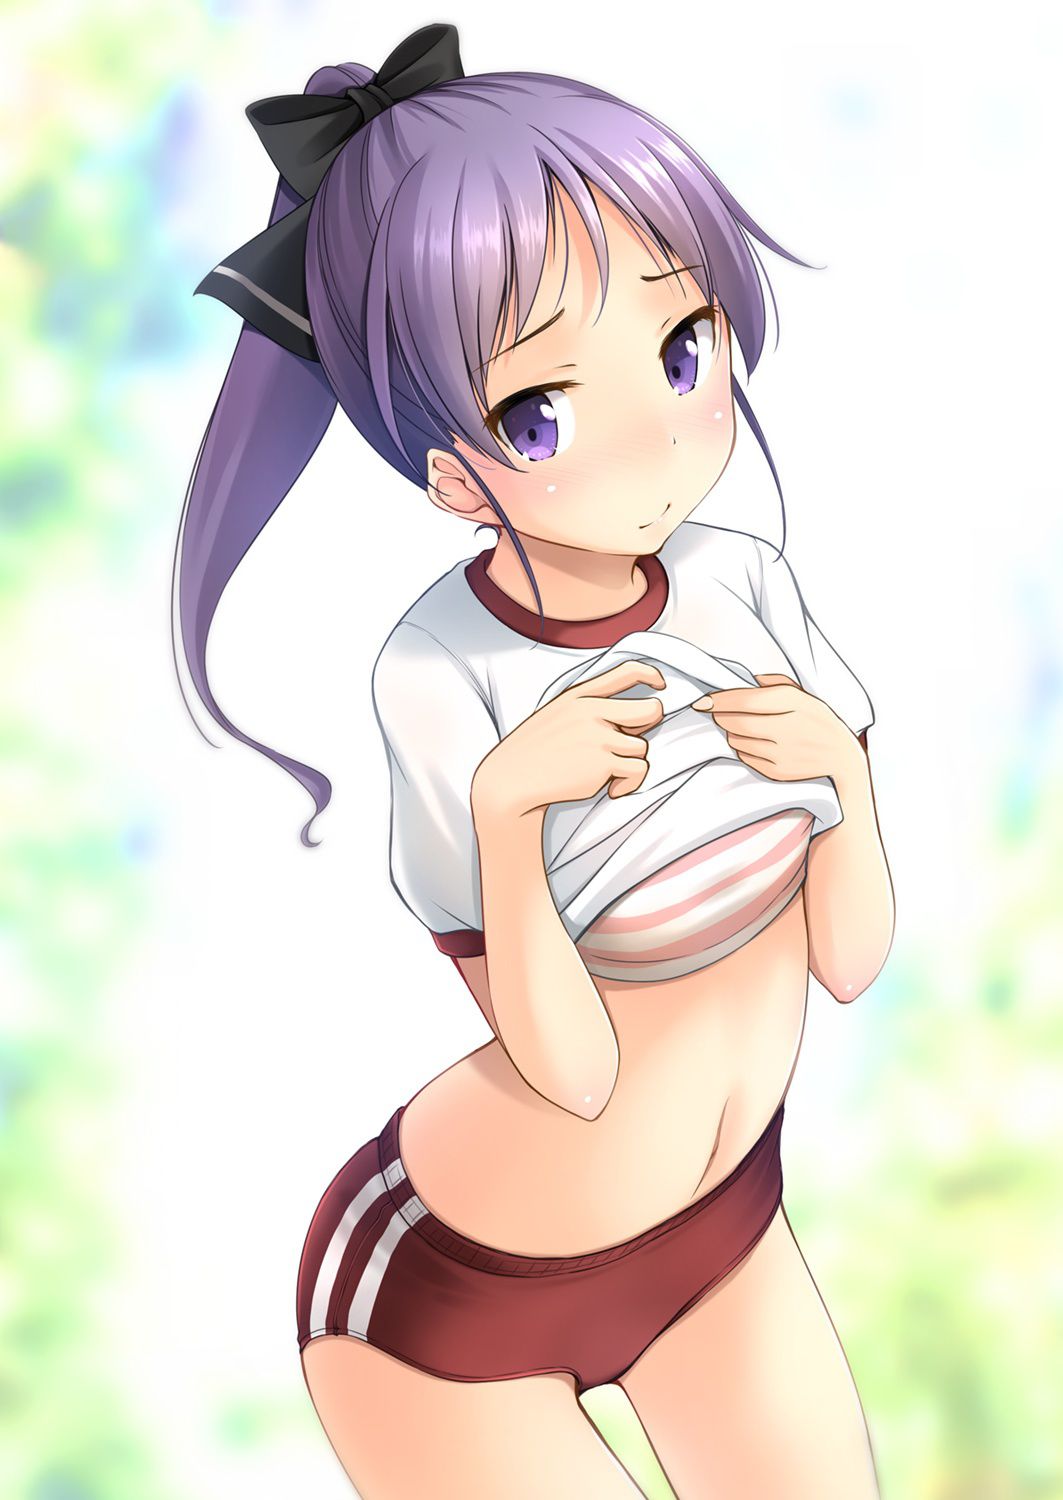 【Gym clothes loli girl】 Originally, today is sports day, so secondary erotic image of secondary loli girl in gymnastics clothes and bulma 49